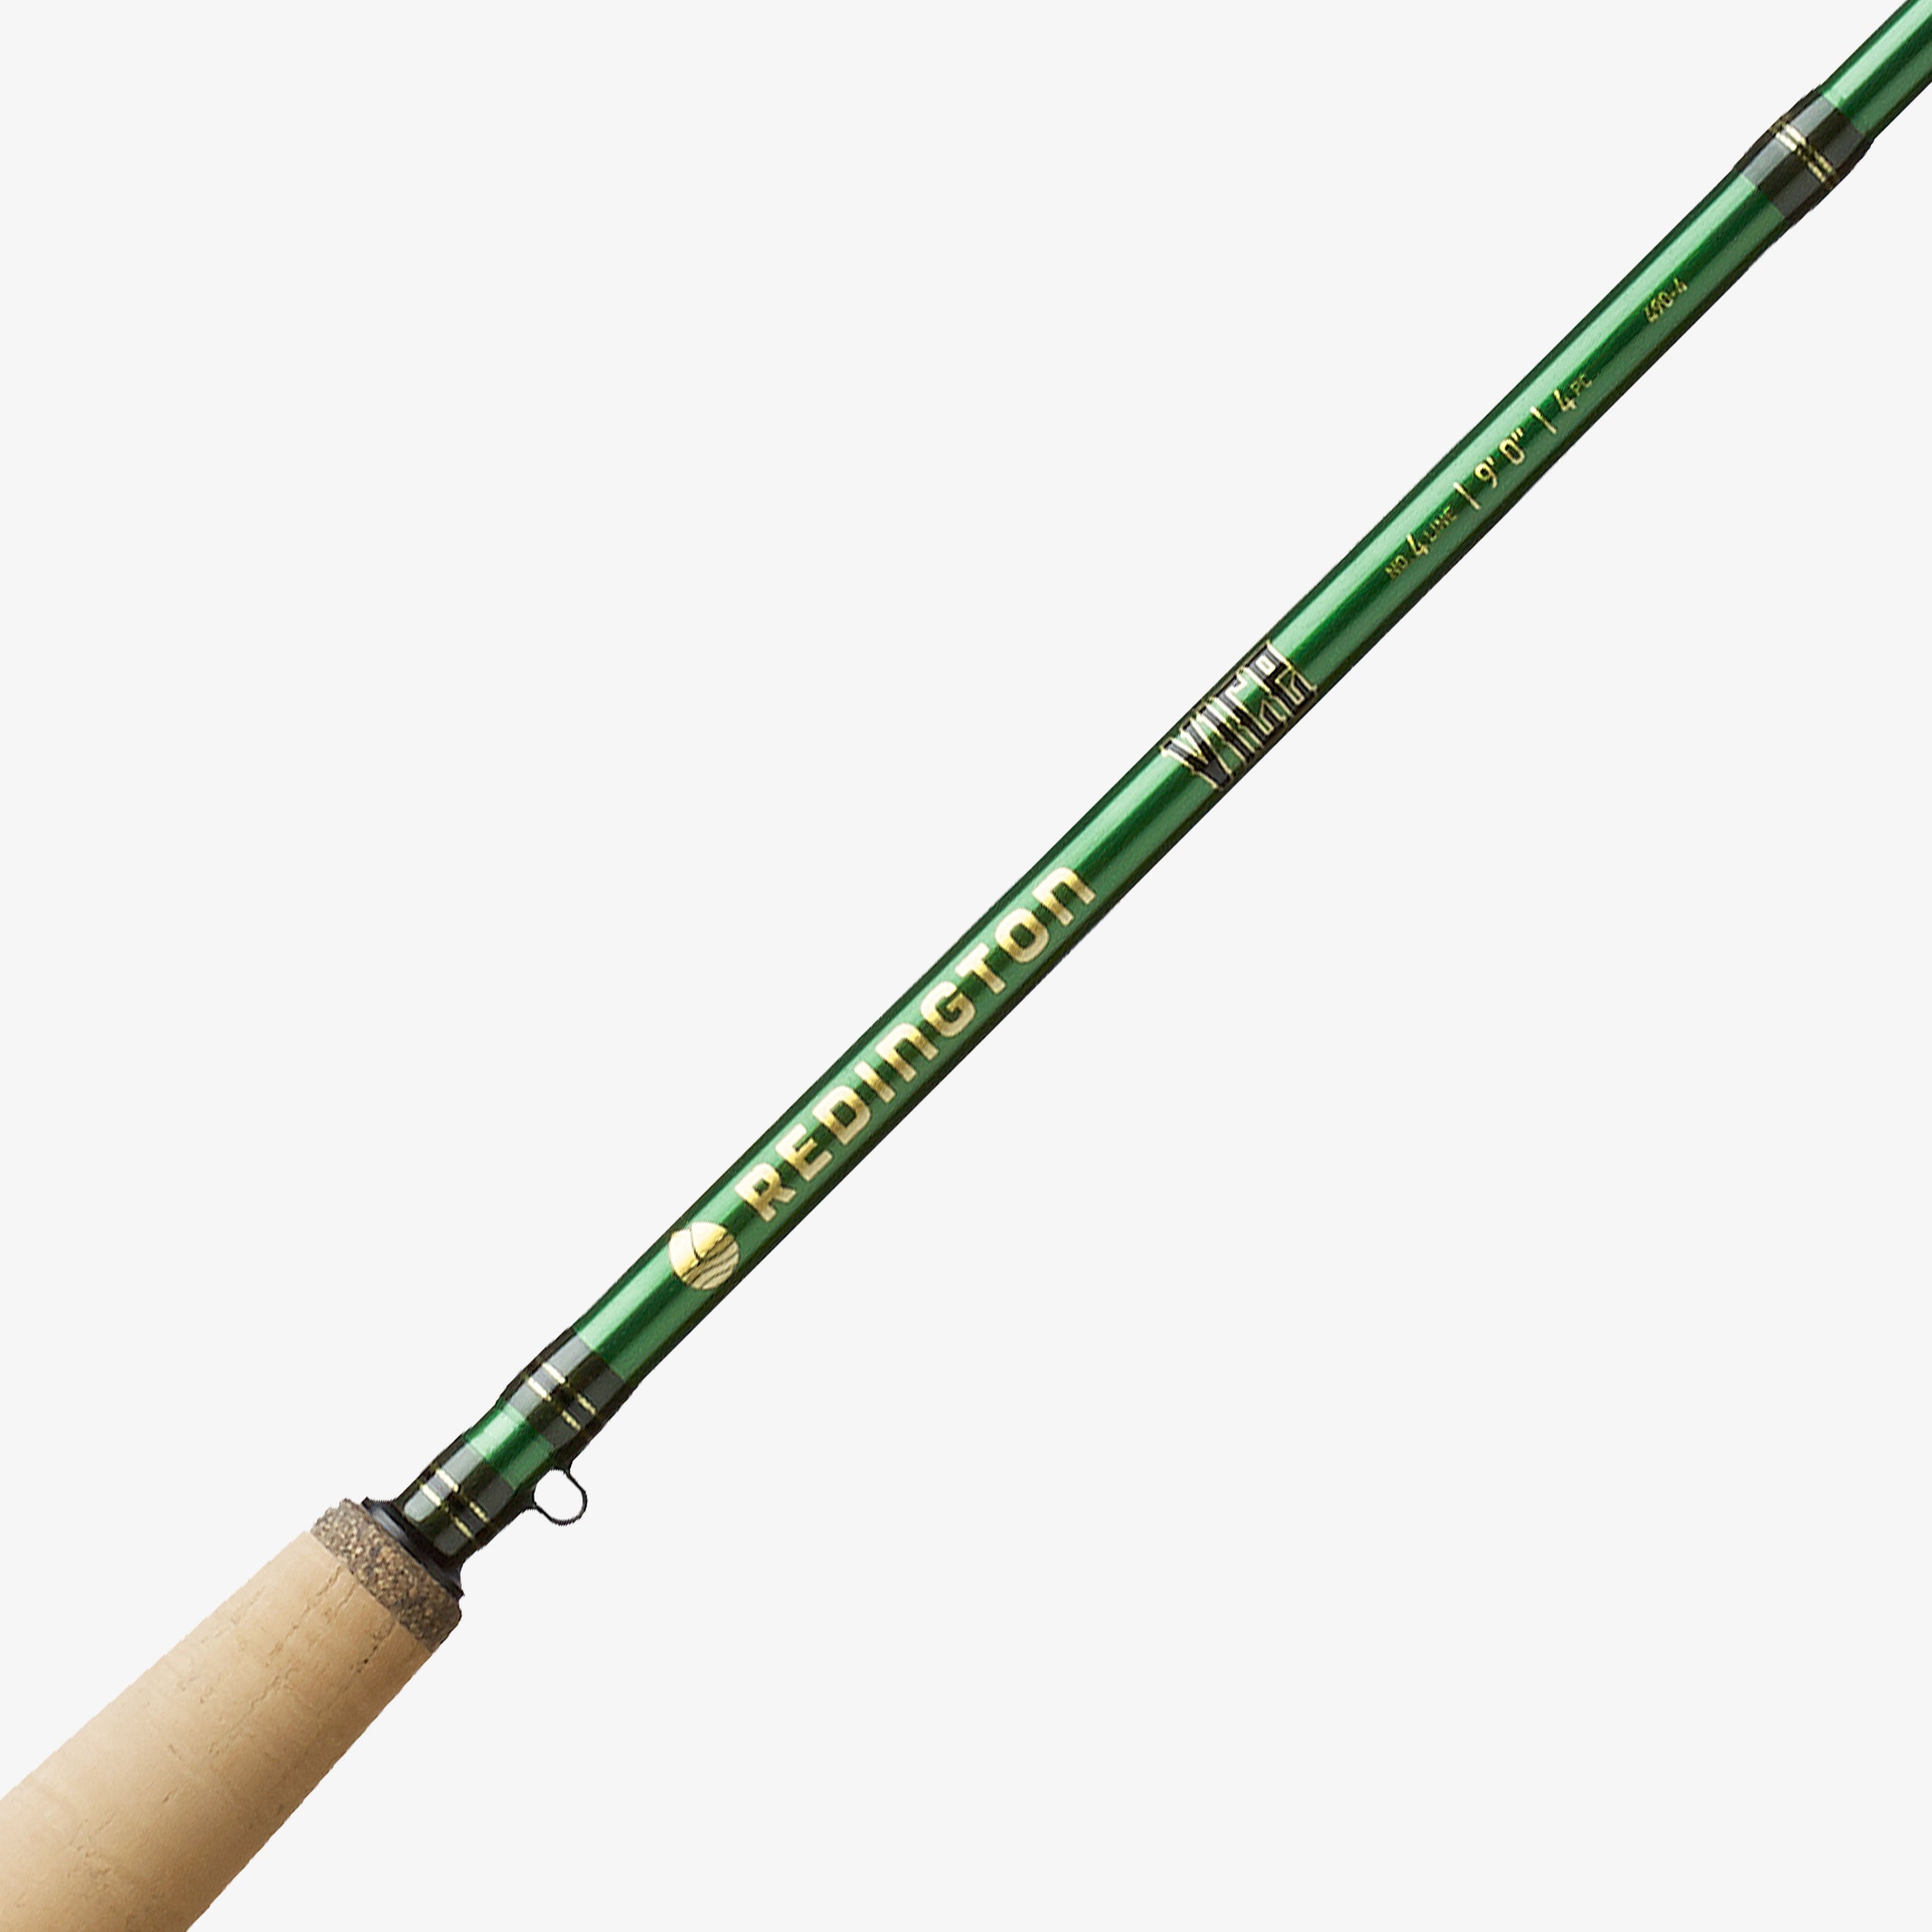 VICE Fly Fishing Rod 4 Weight, 9ft